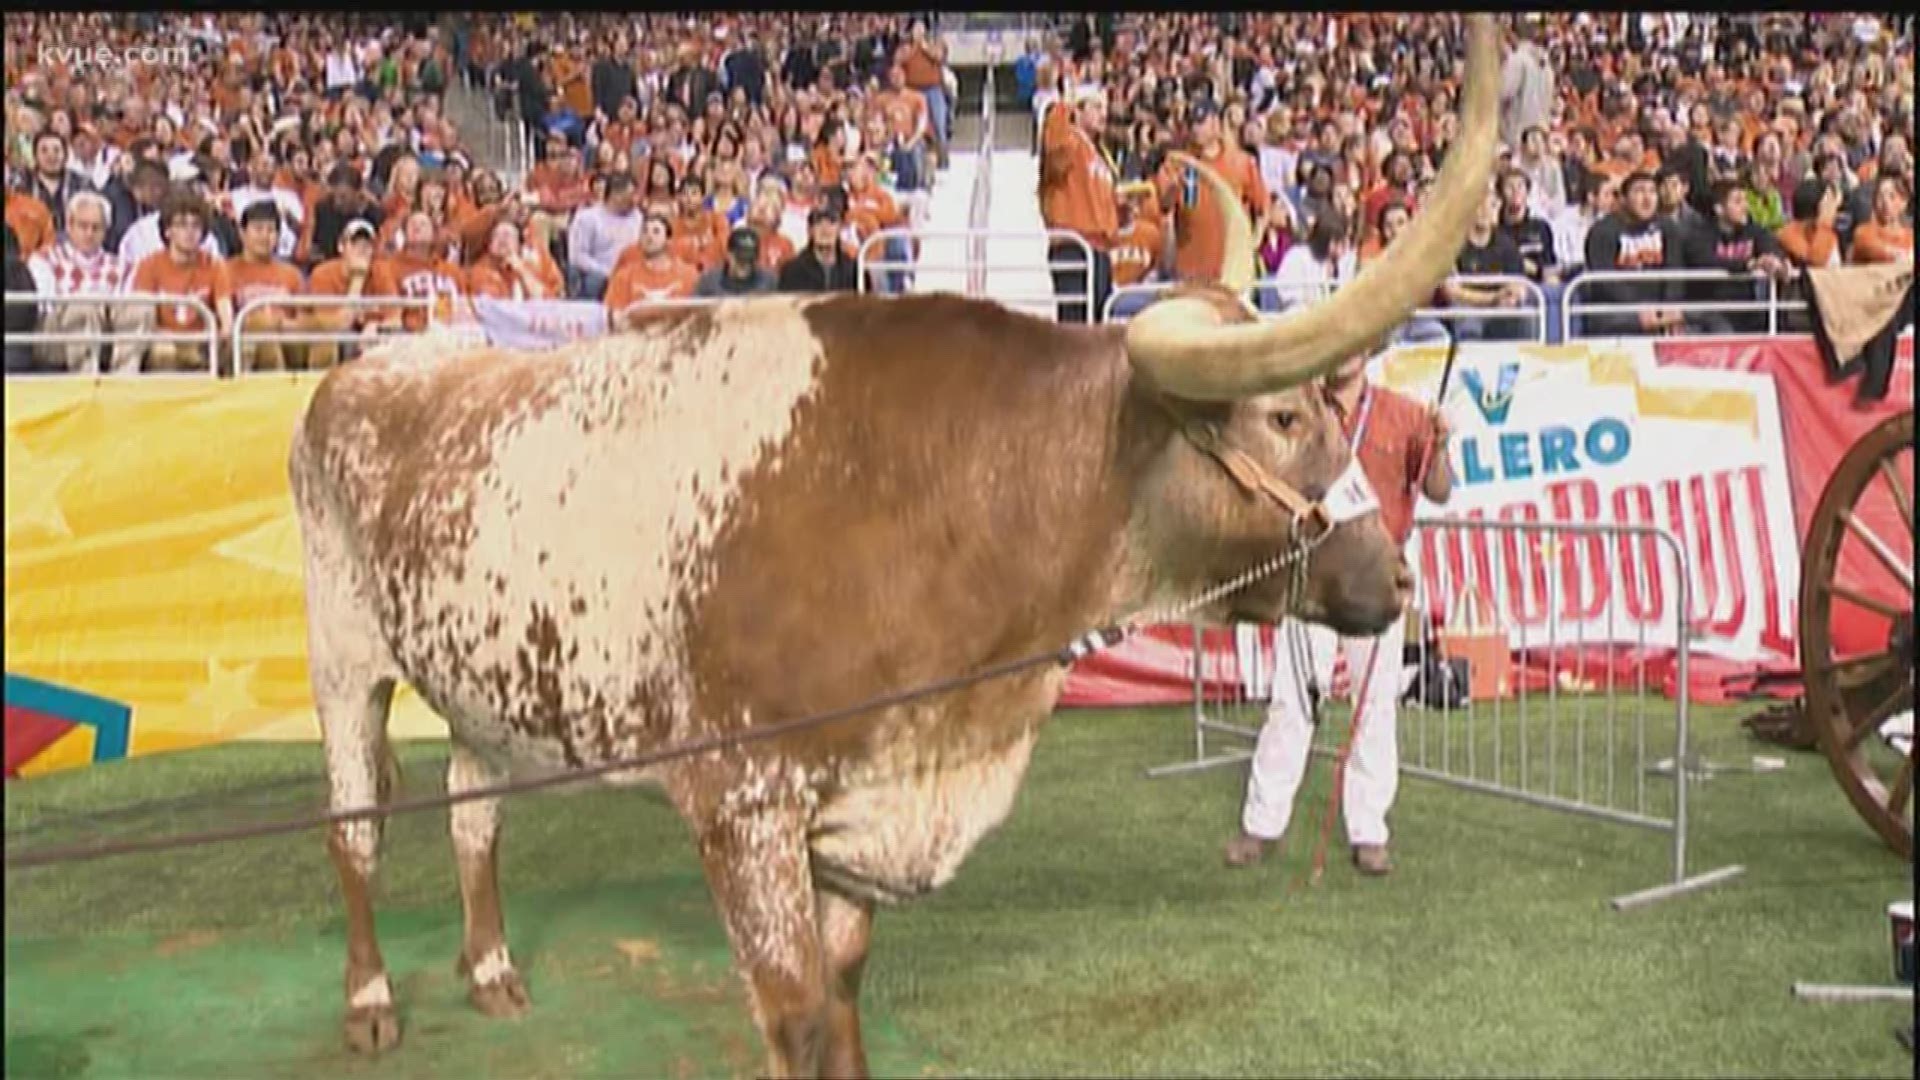 John and Betty Baker have raised championship cattle for decades. A chance meeting in 1988 led them to own arguably the most popular steer in Texas: the University of Texas Longhorns mascot.
STORY: http://www.kvue.com/news/local/how-an-austin-area-family-